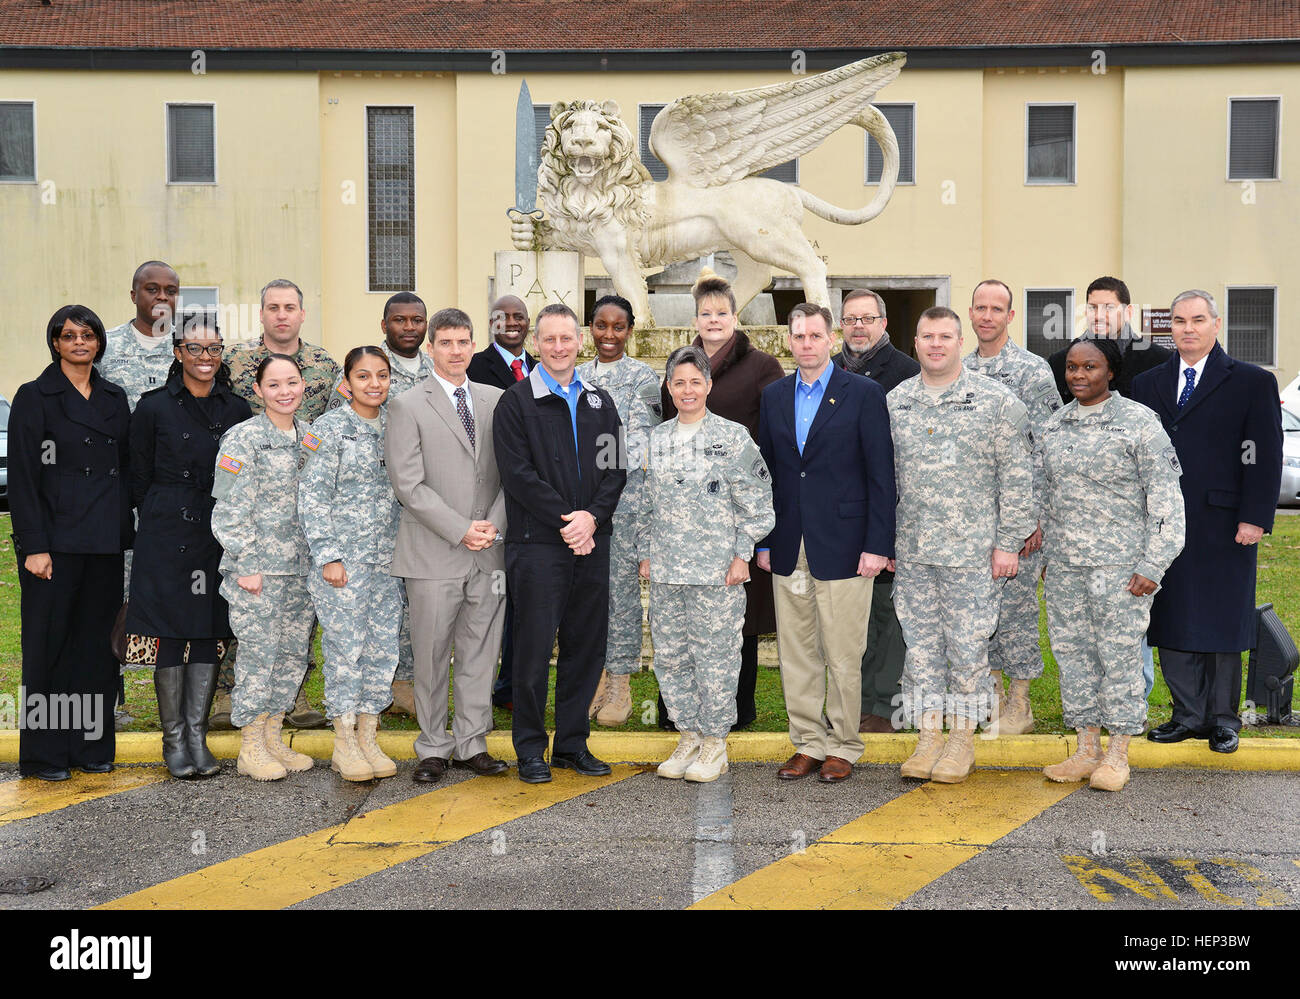 Col. Frances A. Hardison, colonel of Programs and Policy United States Army Africa, with Soldiers and civilians pose for a group photo in front of the USARAF commander's office at Caserma Ederle in Vicenza, Italy, Jan. 23, 2015. (Photo by U.S. Army Visual Information Specialist Davide Dalla Massara) Col. Frances A. Hardison with Soldiers, civilians pose for group photo 150123-A-DO858-001 Stock Photo